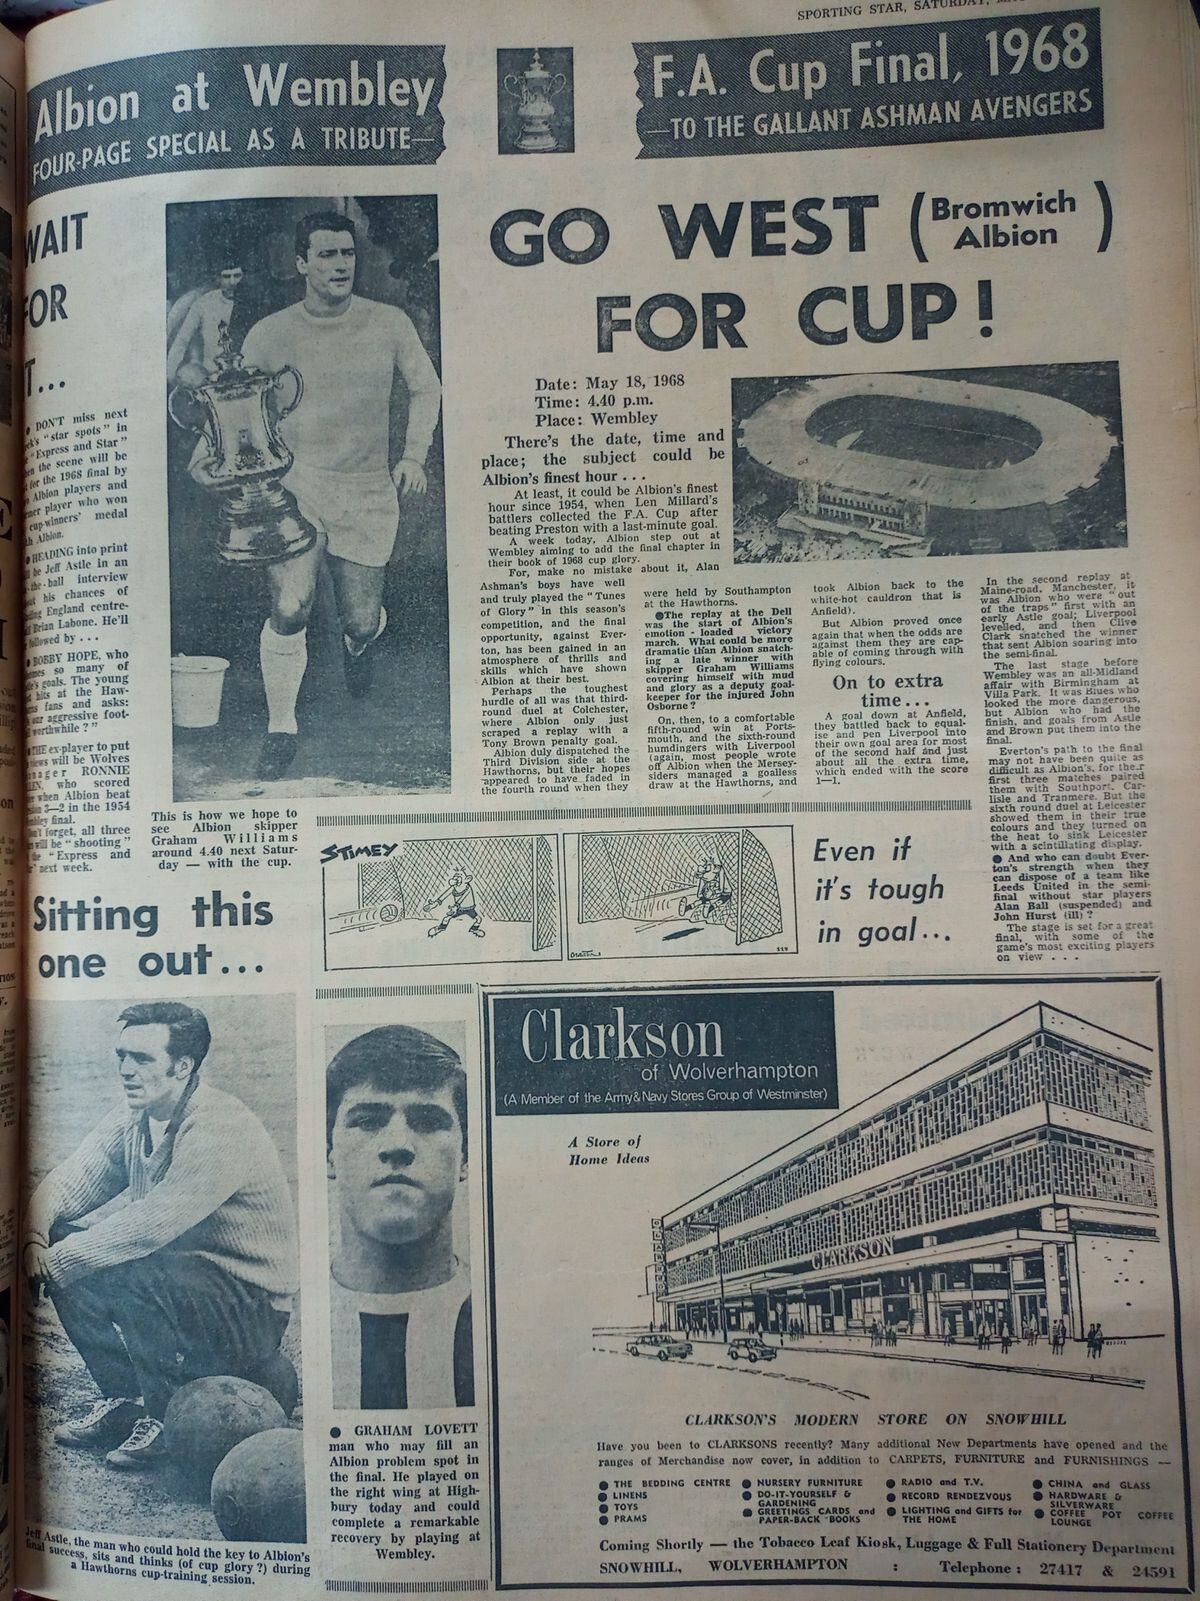 May 11, 1968 - preview of FA Cup final